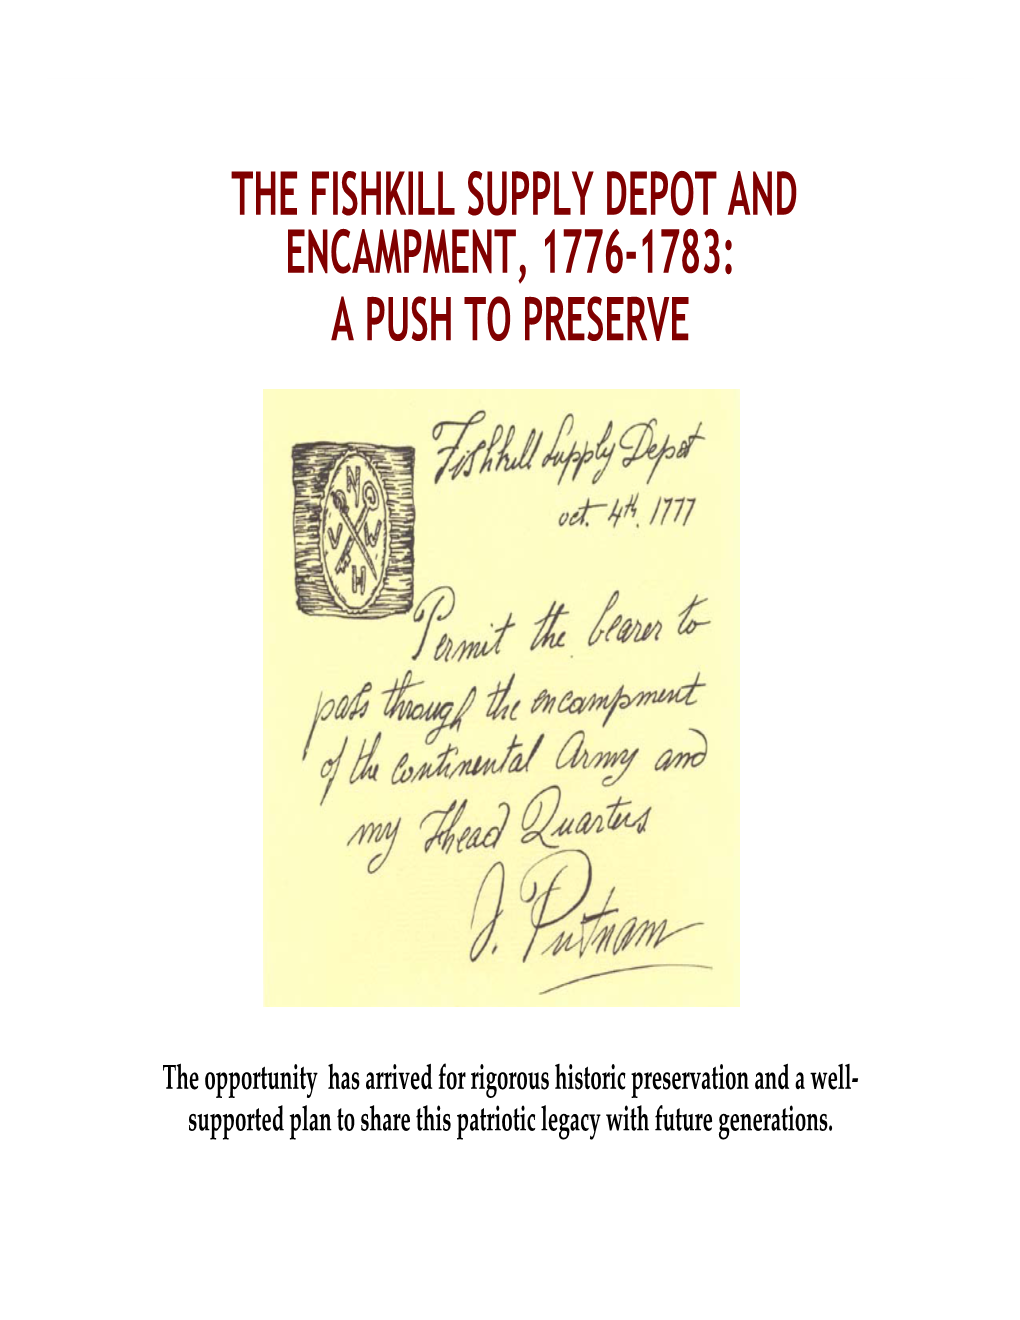 The Fishkill Supply Depot and Encampment, 1776-1783: a Push to Preserve